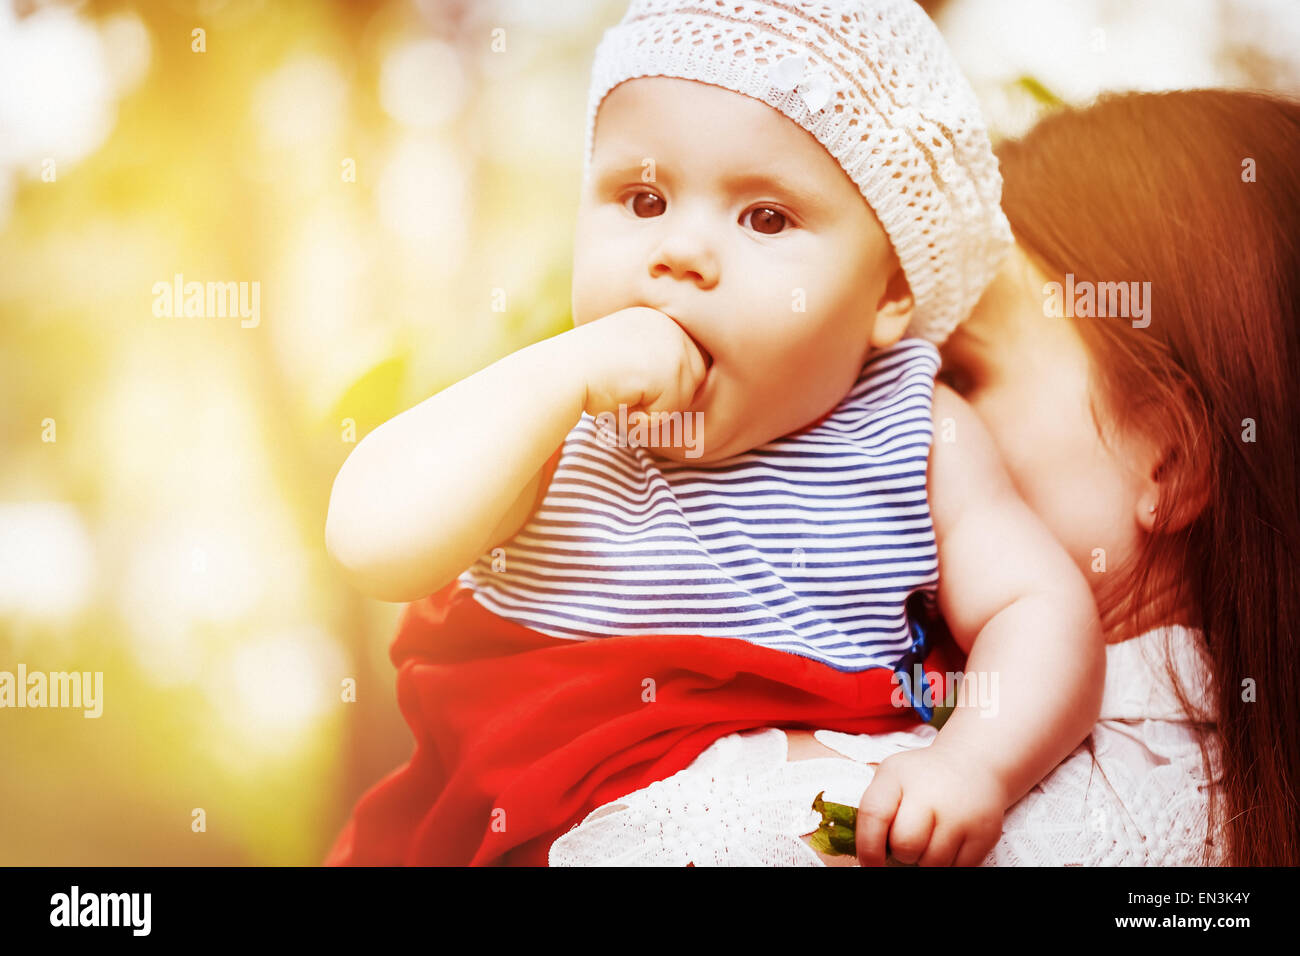 Beautiful cute baby girl in summer cap in the arms of her mother. Summer. Grain added for best impression. Stock Photo